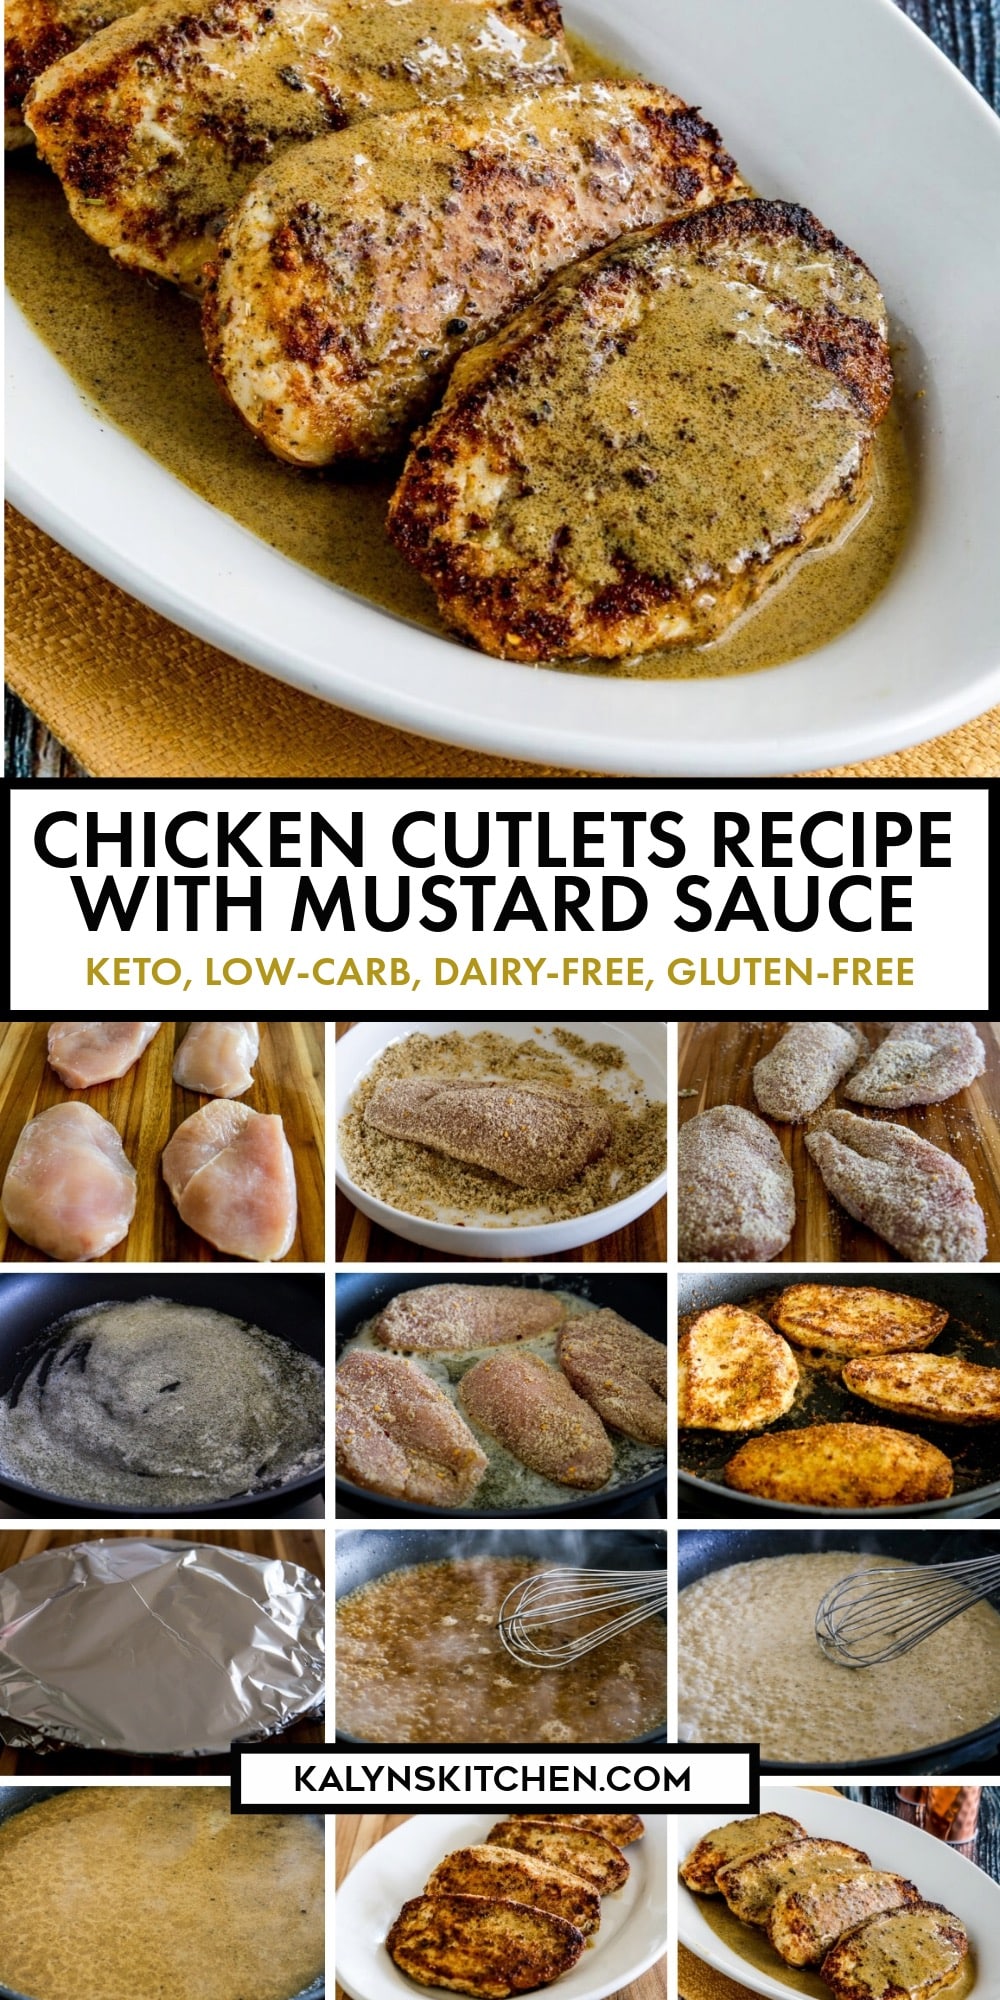 Pinterest image of Chicken Cutlets Recipe with Mustard Sauce